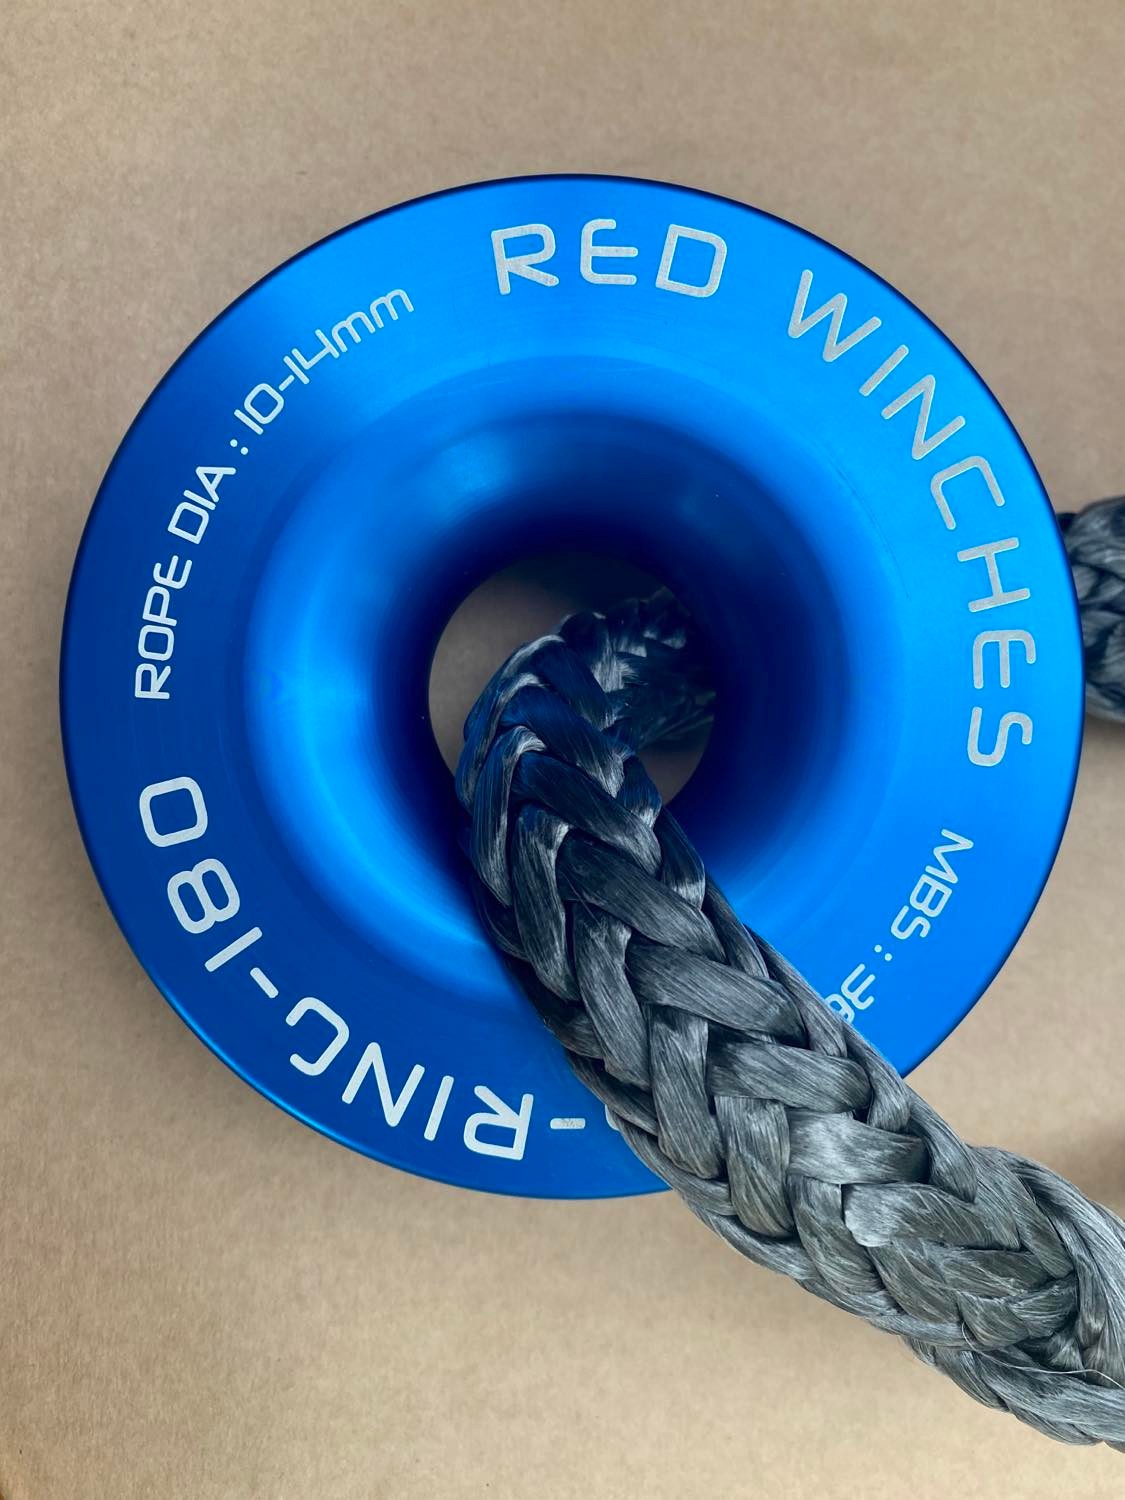 S-RING-180 RED WINCH Snatch ring 18T